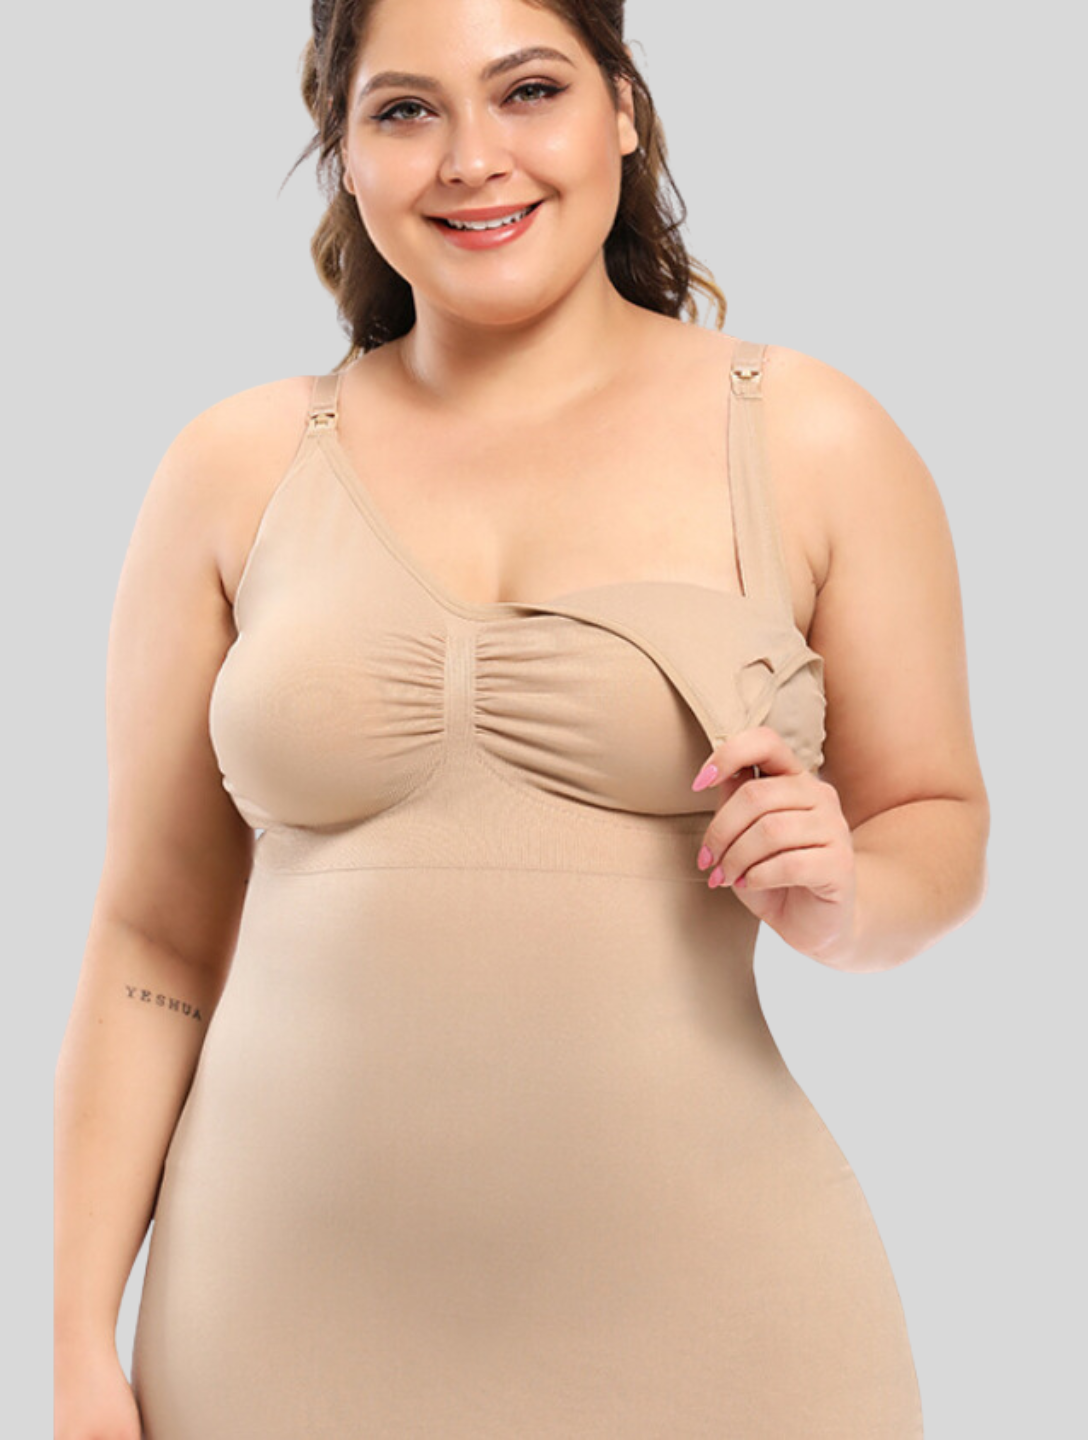 This Viral Shapewear Bodysuit From  Has Shoppers Looking So 'Snatched'—&  It's on Sale RN